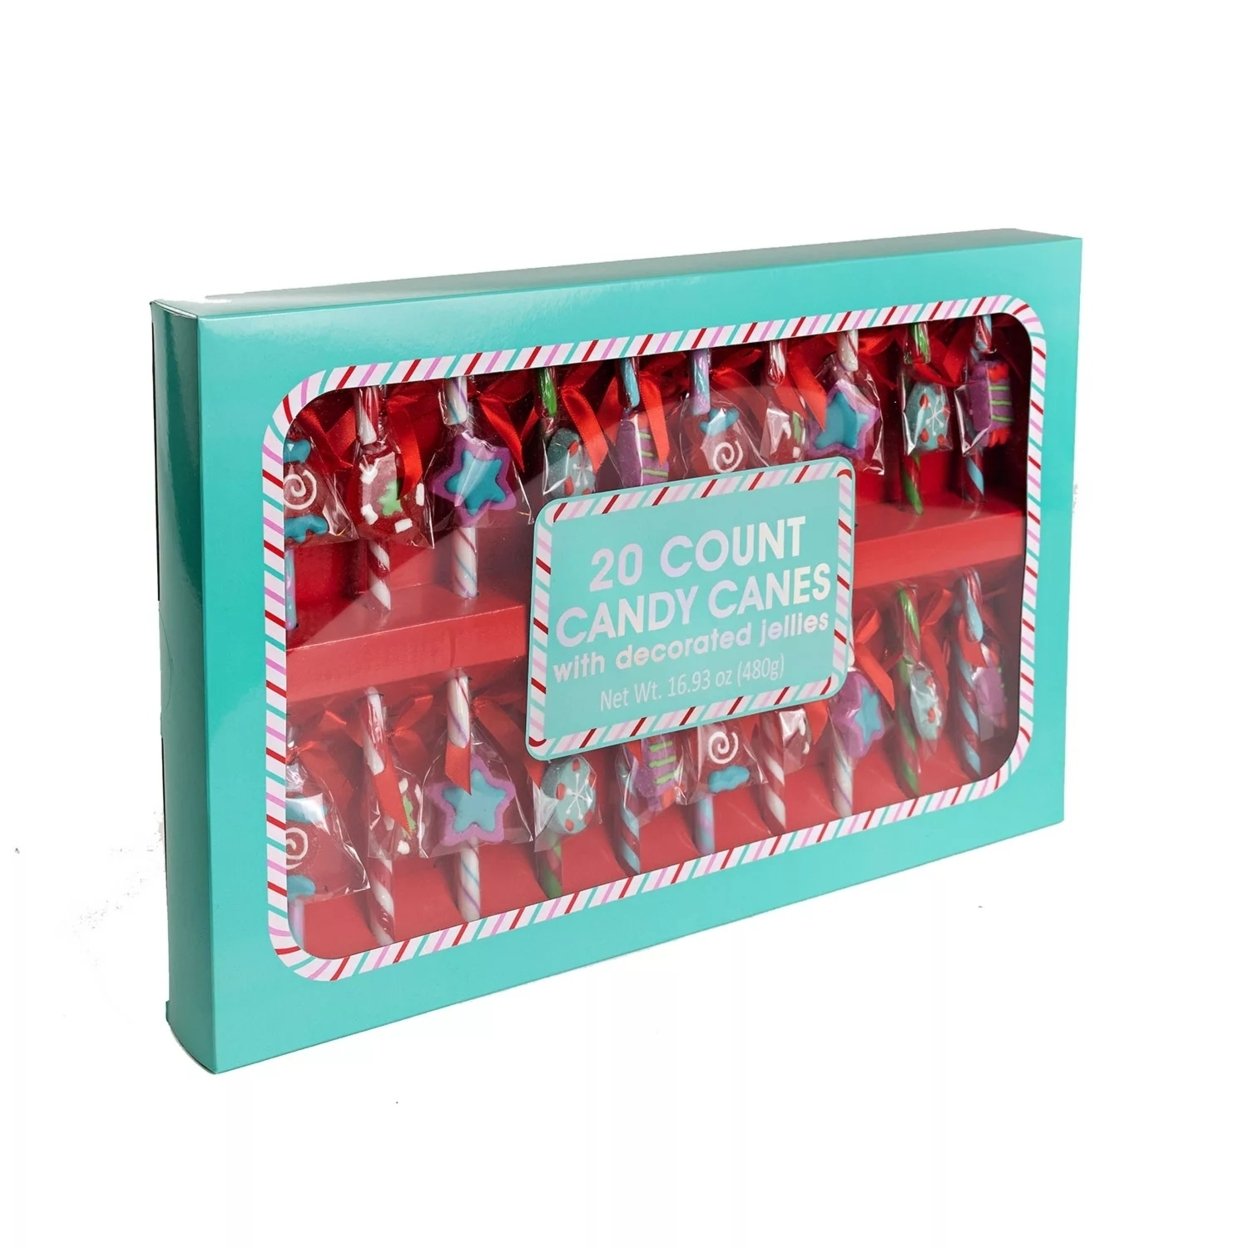 Holiday Candy Canes With Decorated Jellies, 20 Count (16.9 Ounce)